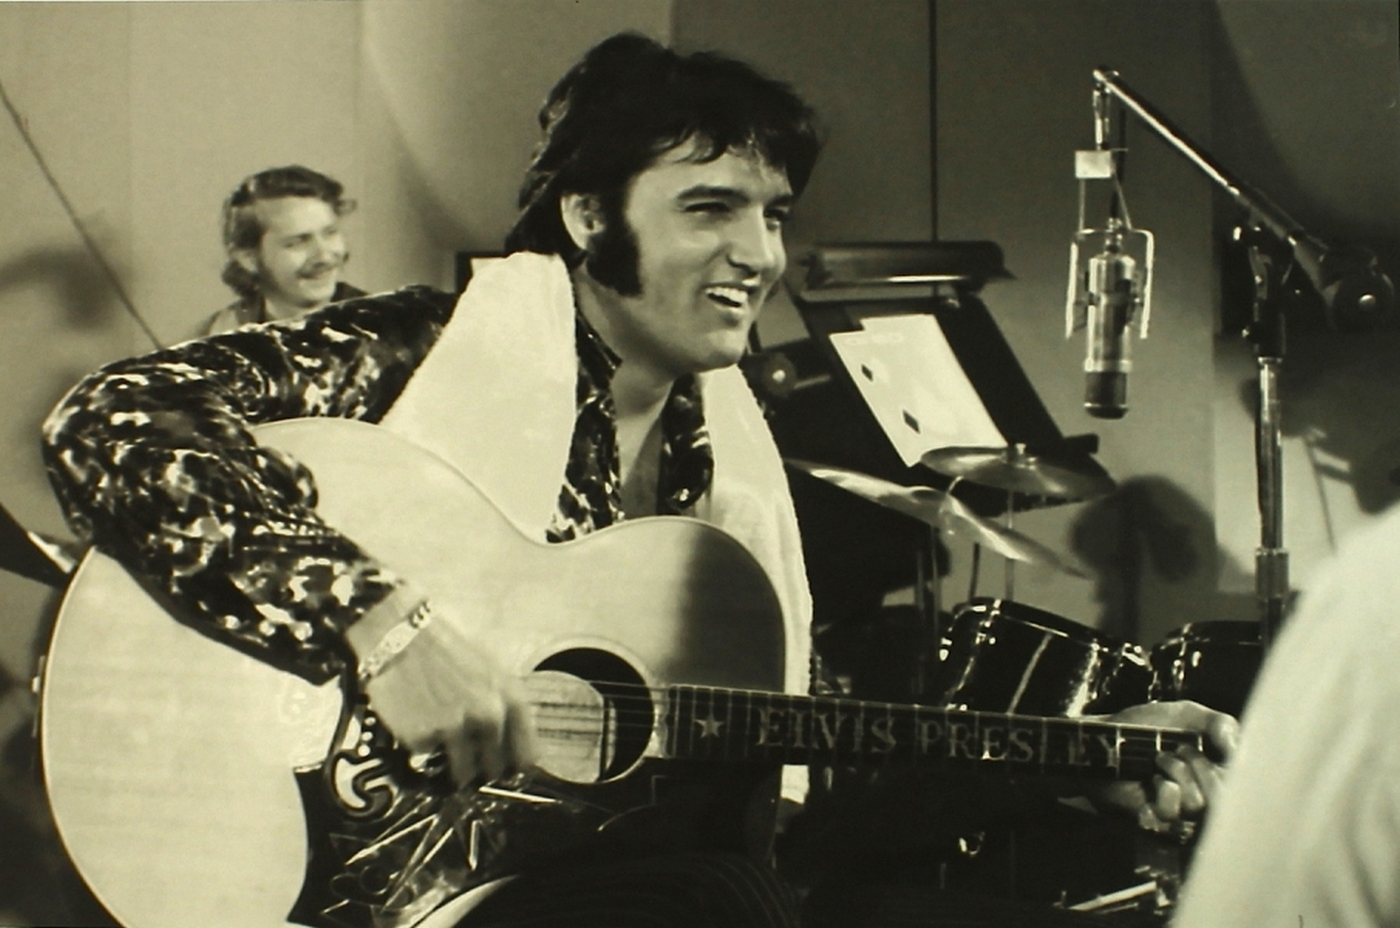 main_1-Hulton-Getty-Collection-That-s-The-Way-It-Is-Elvis-Presley-Limited-Edition-16x23-Giclee-from-Original-Negative-70-275-PristineAuction.com_